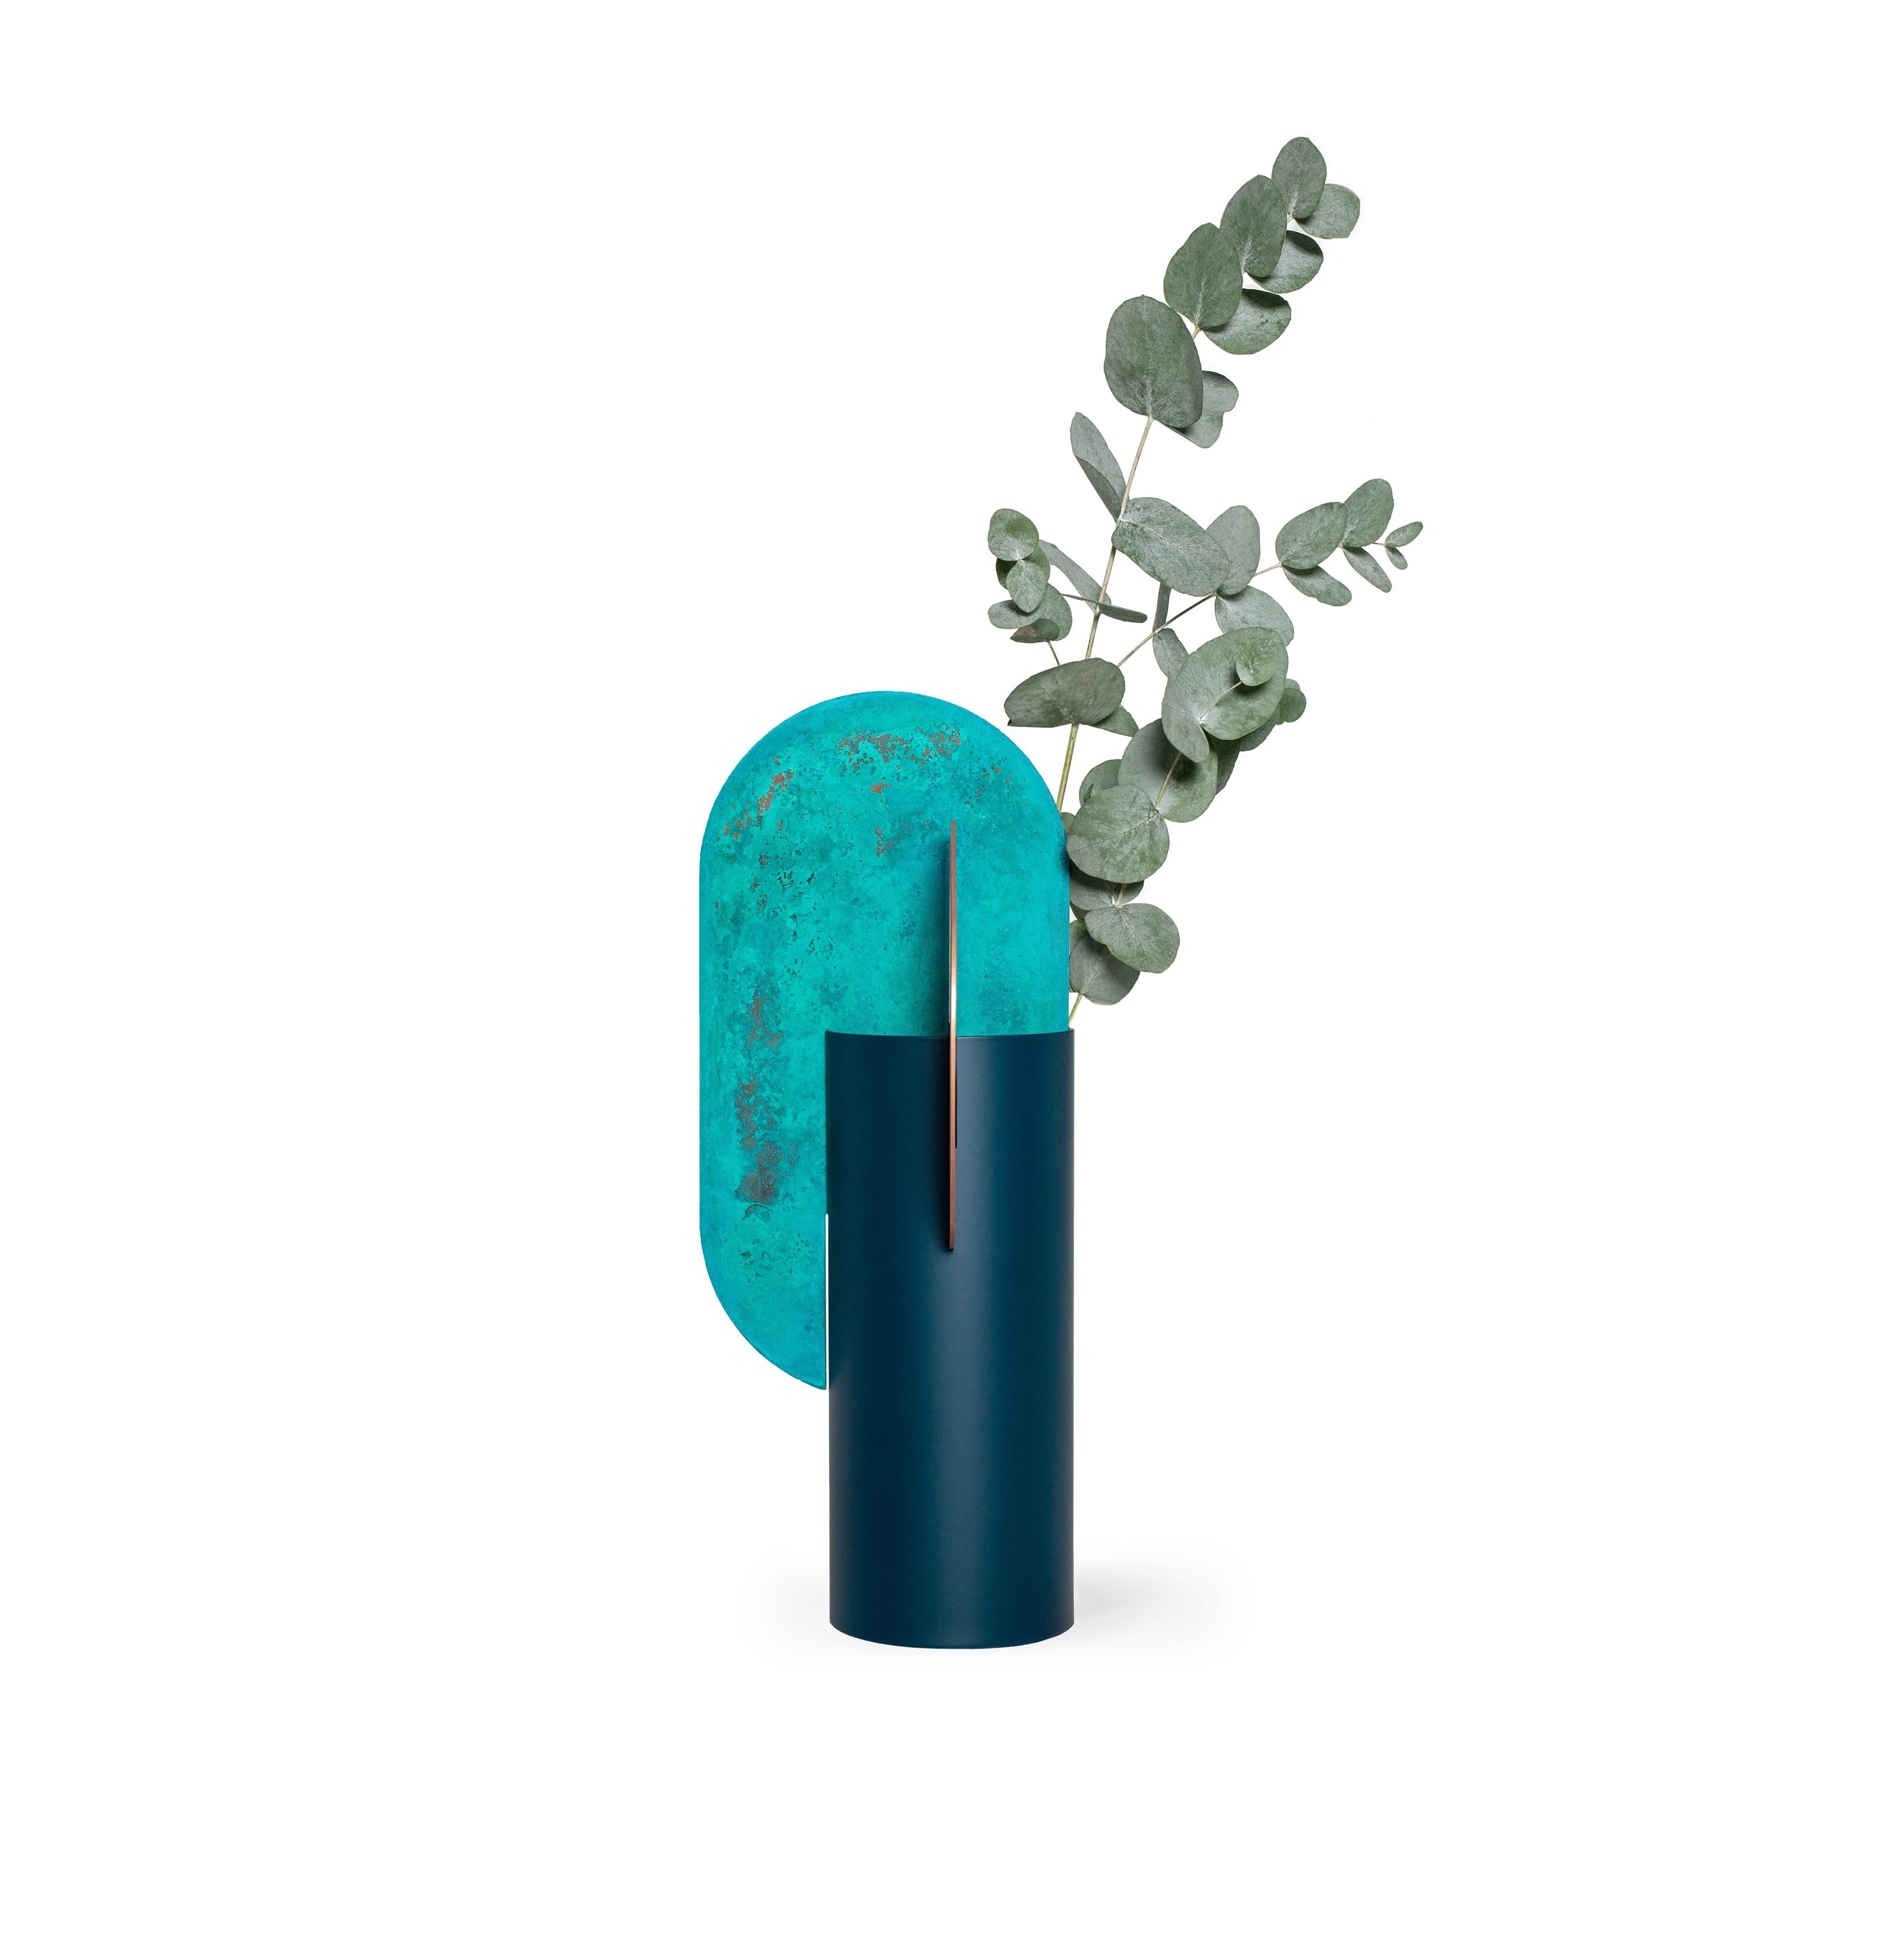 Painted Contemporary Vase 'Yermilov CSL2' by NOOM, Oxidized Copper and Steel For Sale